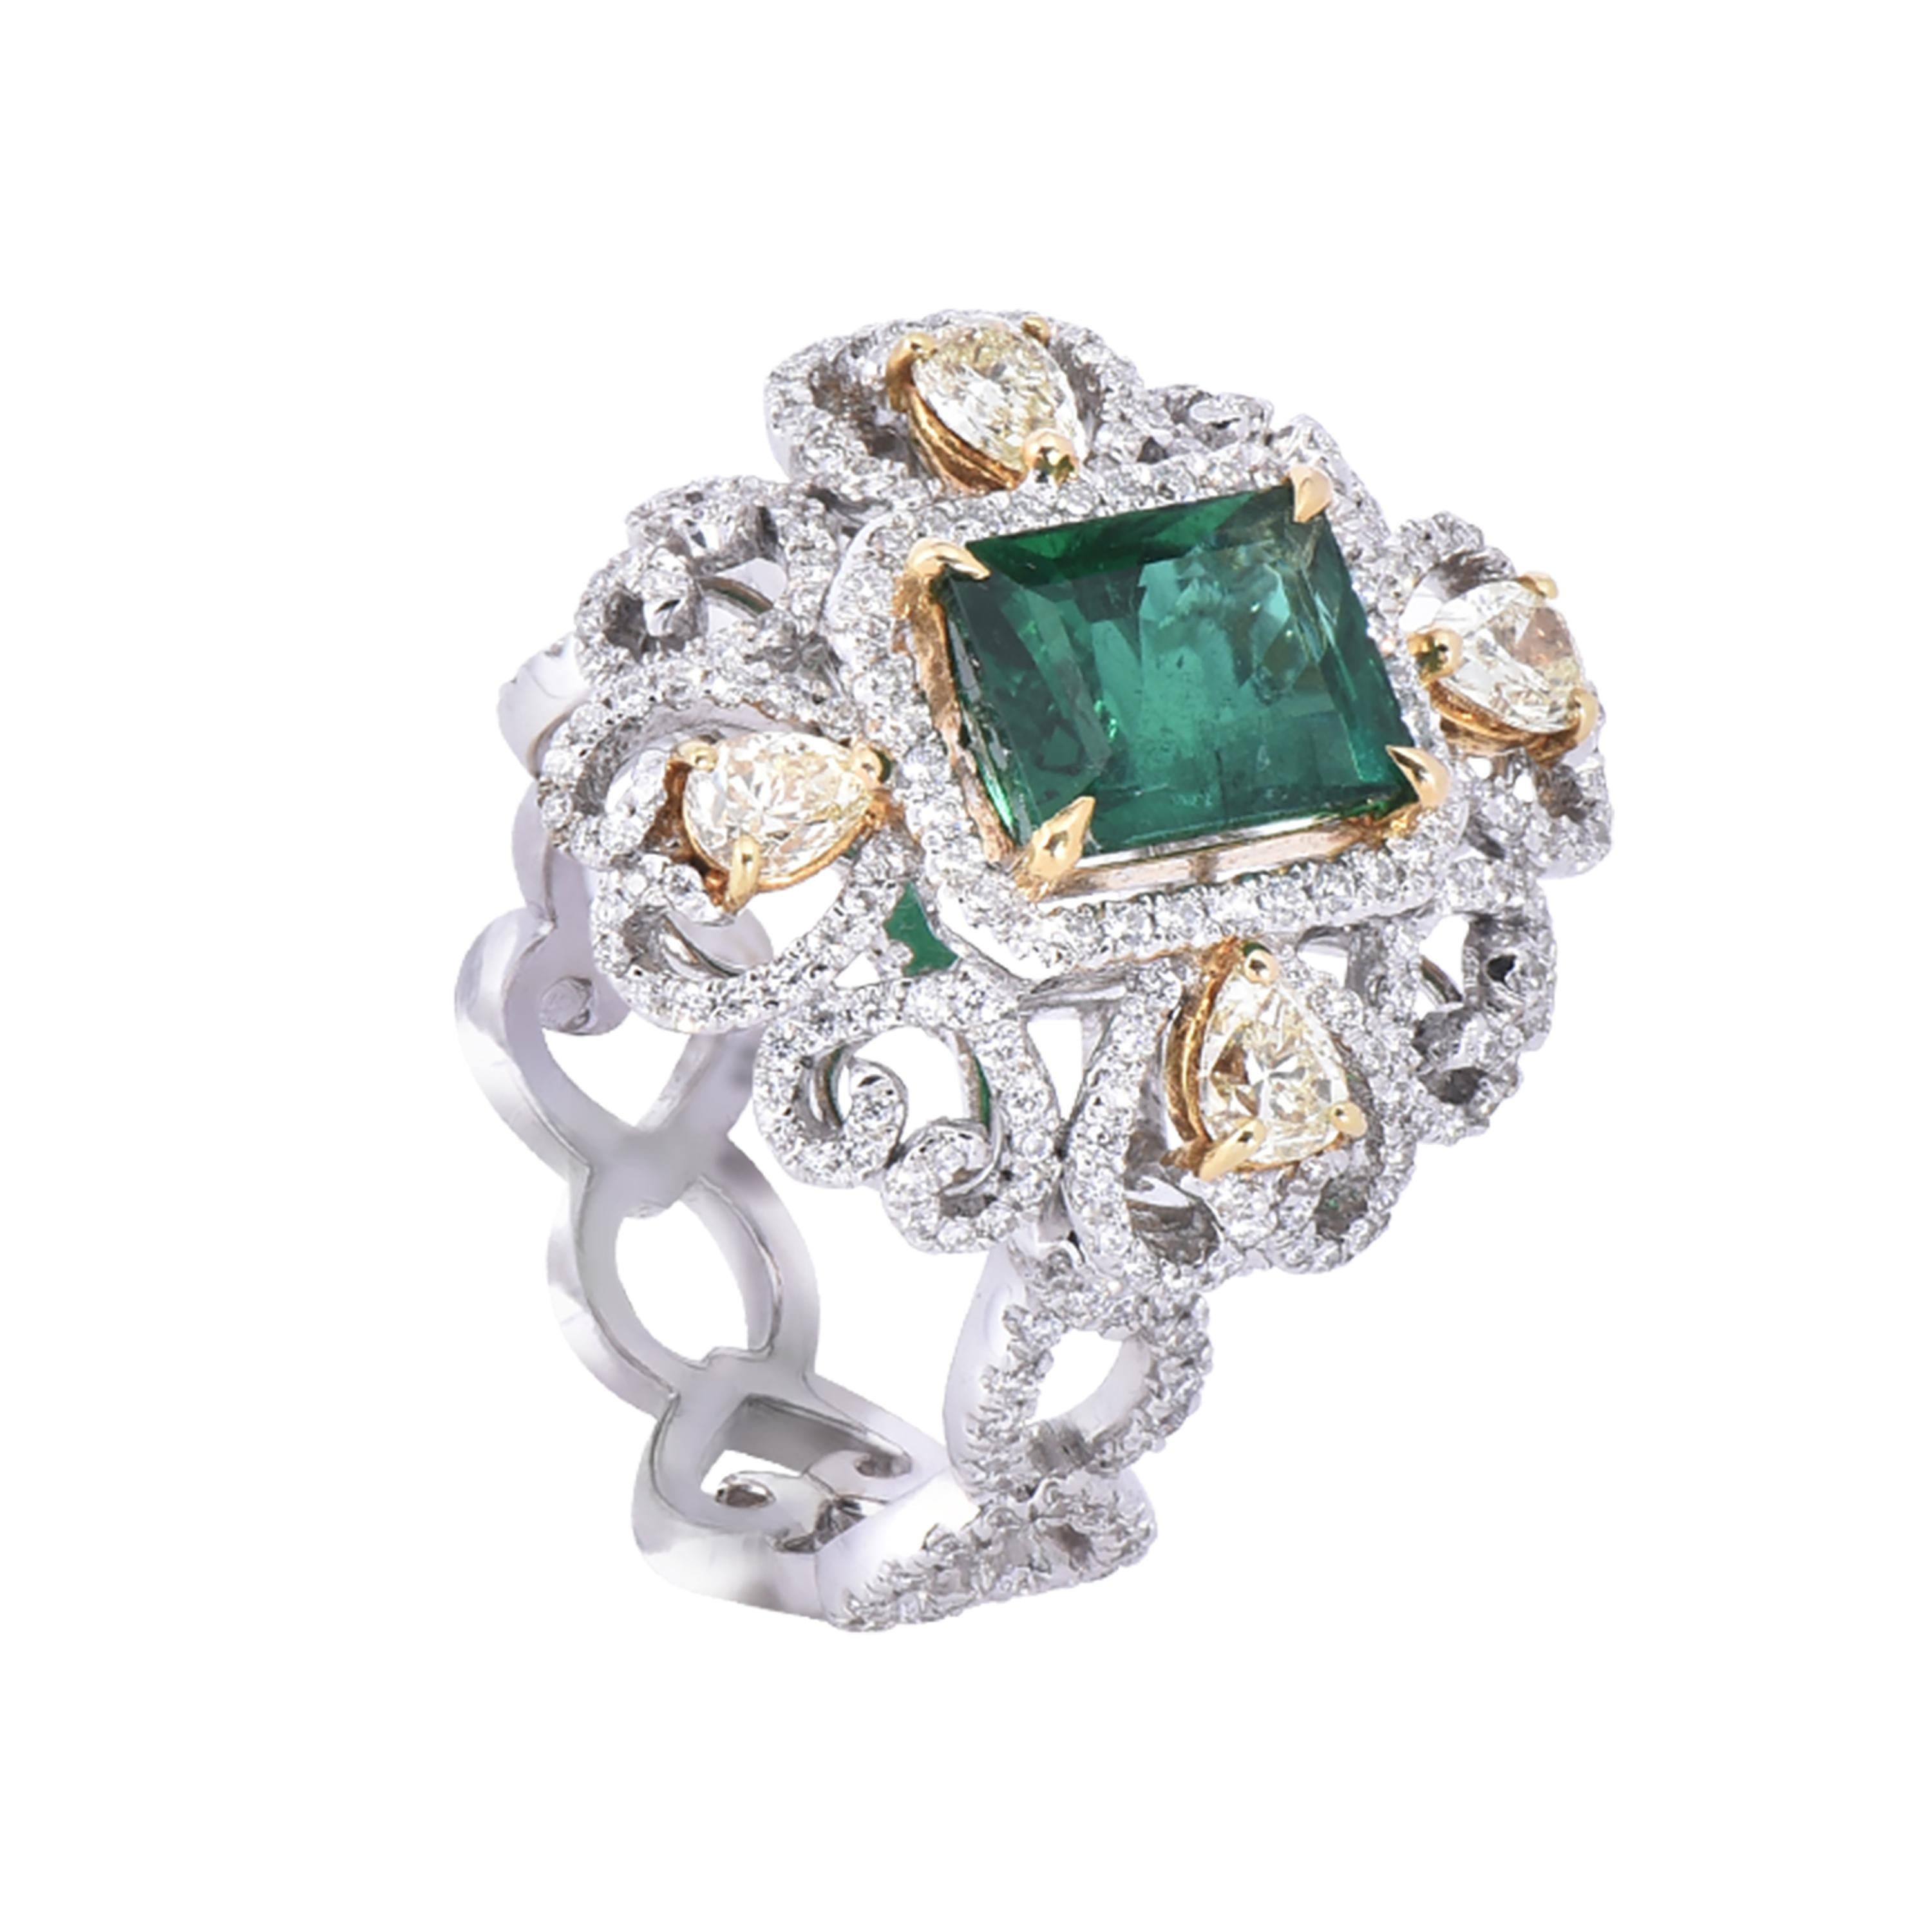 An elegant 18 karat white & yellow gold emerald ring from the Veronese collection of Laviere. The ring is set with a GRS certified 2.30 carats emerald-cut emerald, 0.66 carats pear shape fancy light yellow diamonds and 0.93 carats white brilliant